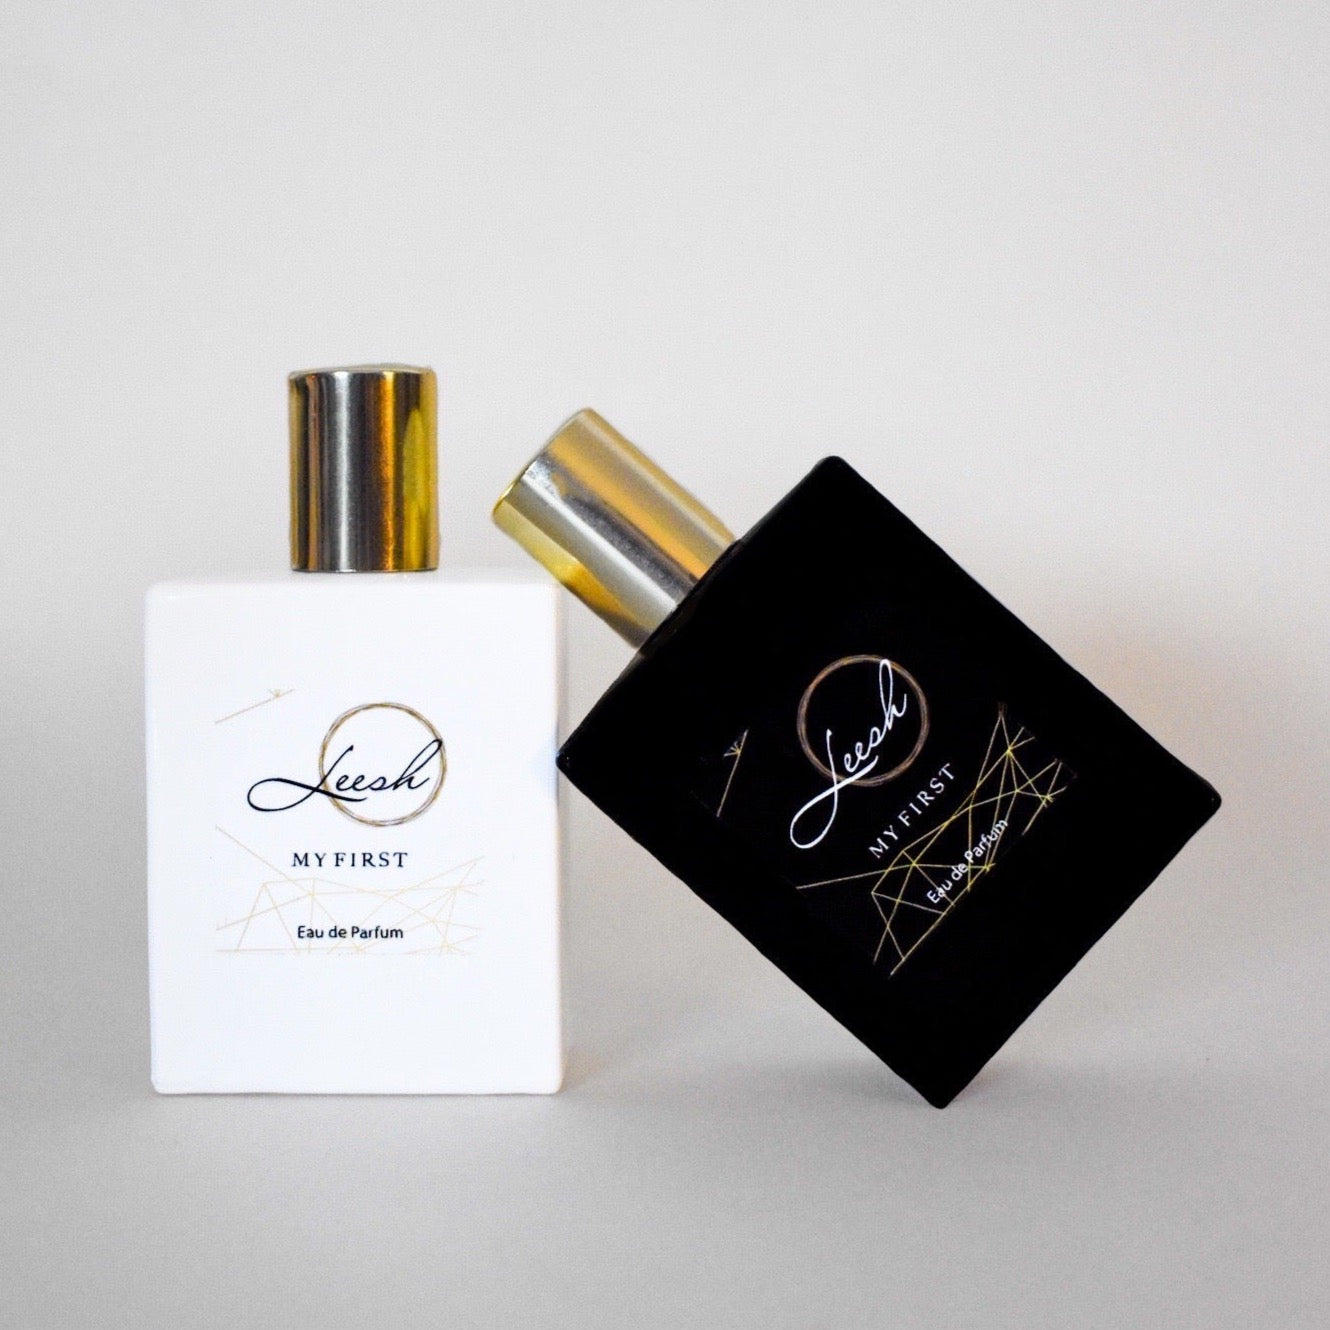 Shop Leesh Fragrances' luxurious Her First and His First fragrance bottles on sleek grey background. The elegant white bottle of Her First features a gleaming gold lid, while the sophisticated black bottle of His First, with matching gold lid, leans on Her First.